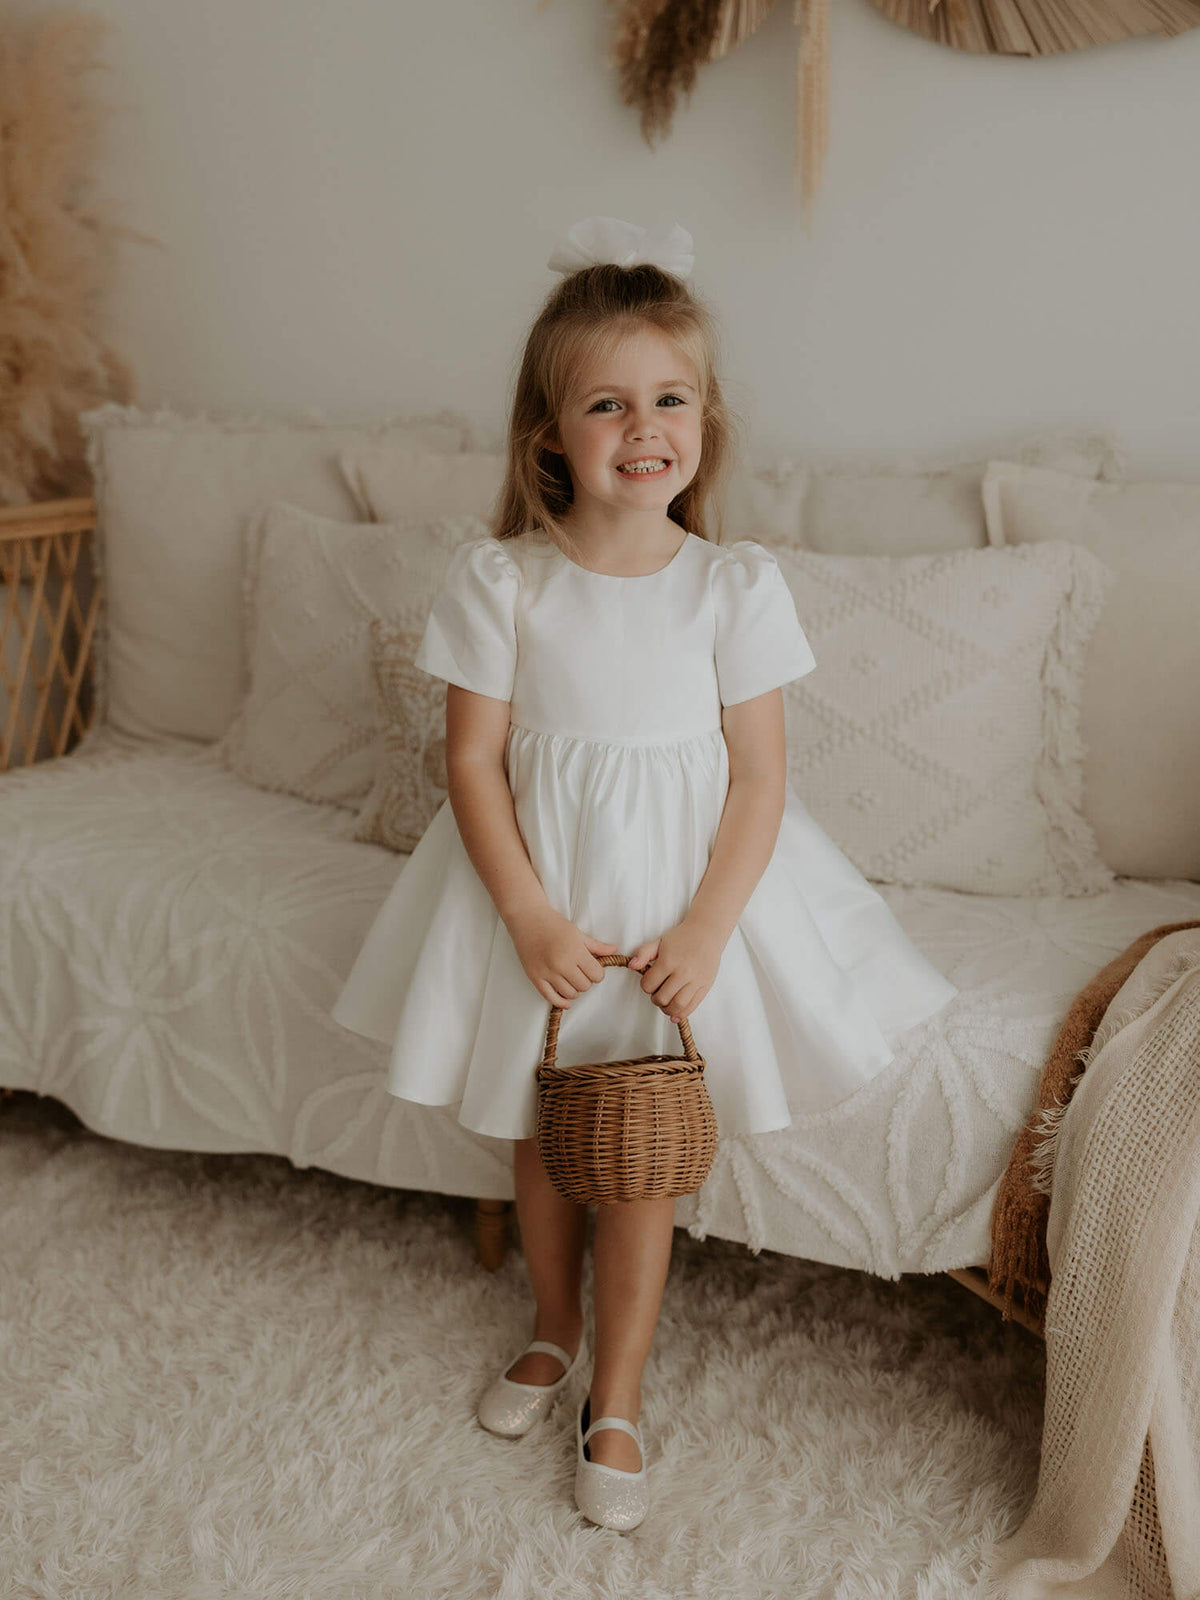 Charlotte satin flower girl dress is worn by a young girl.